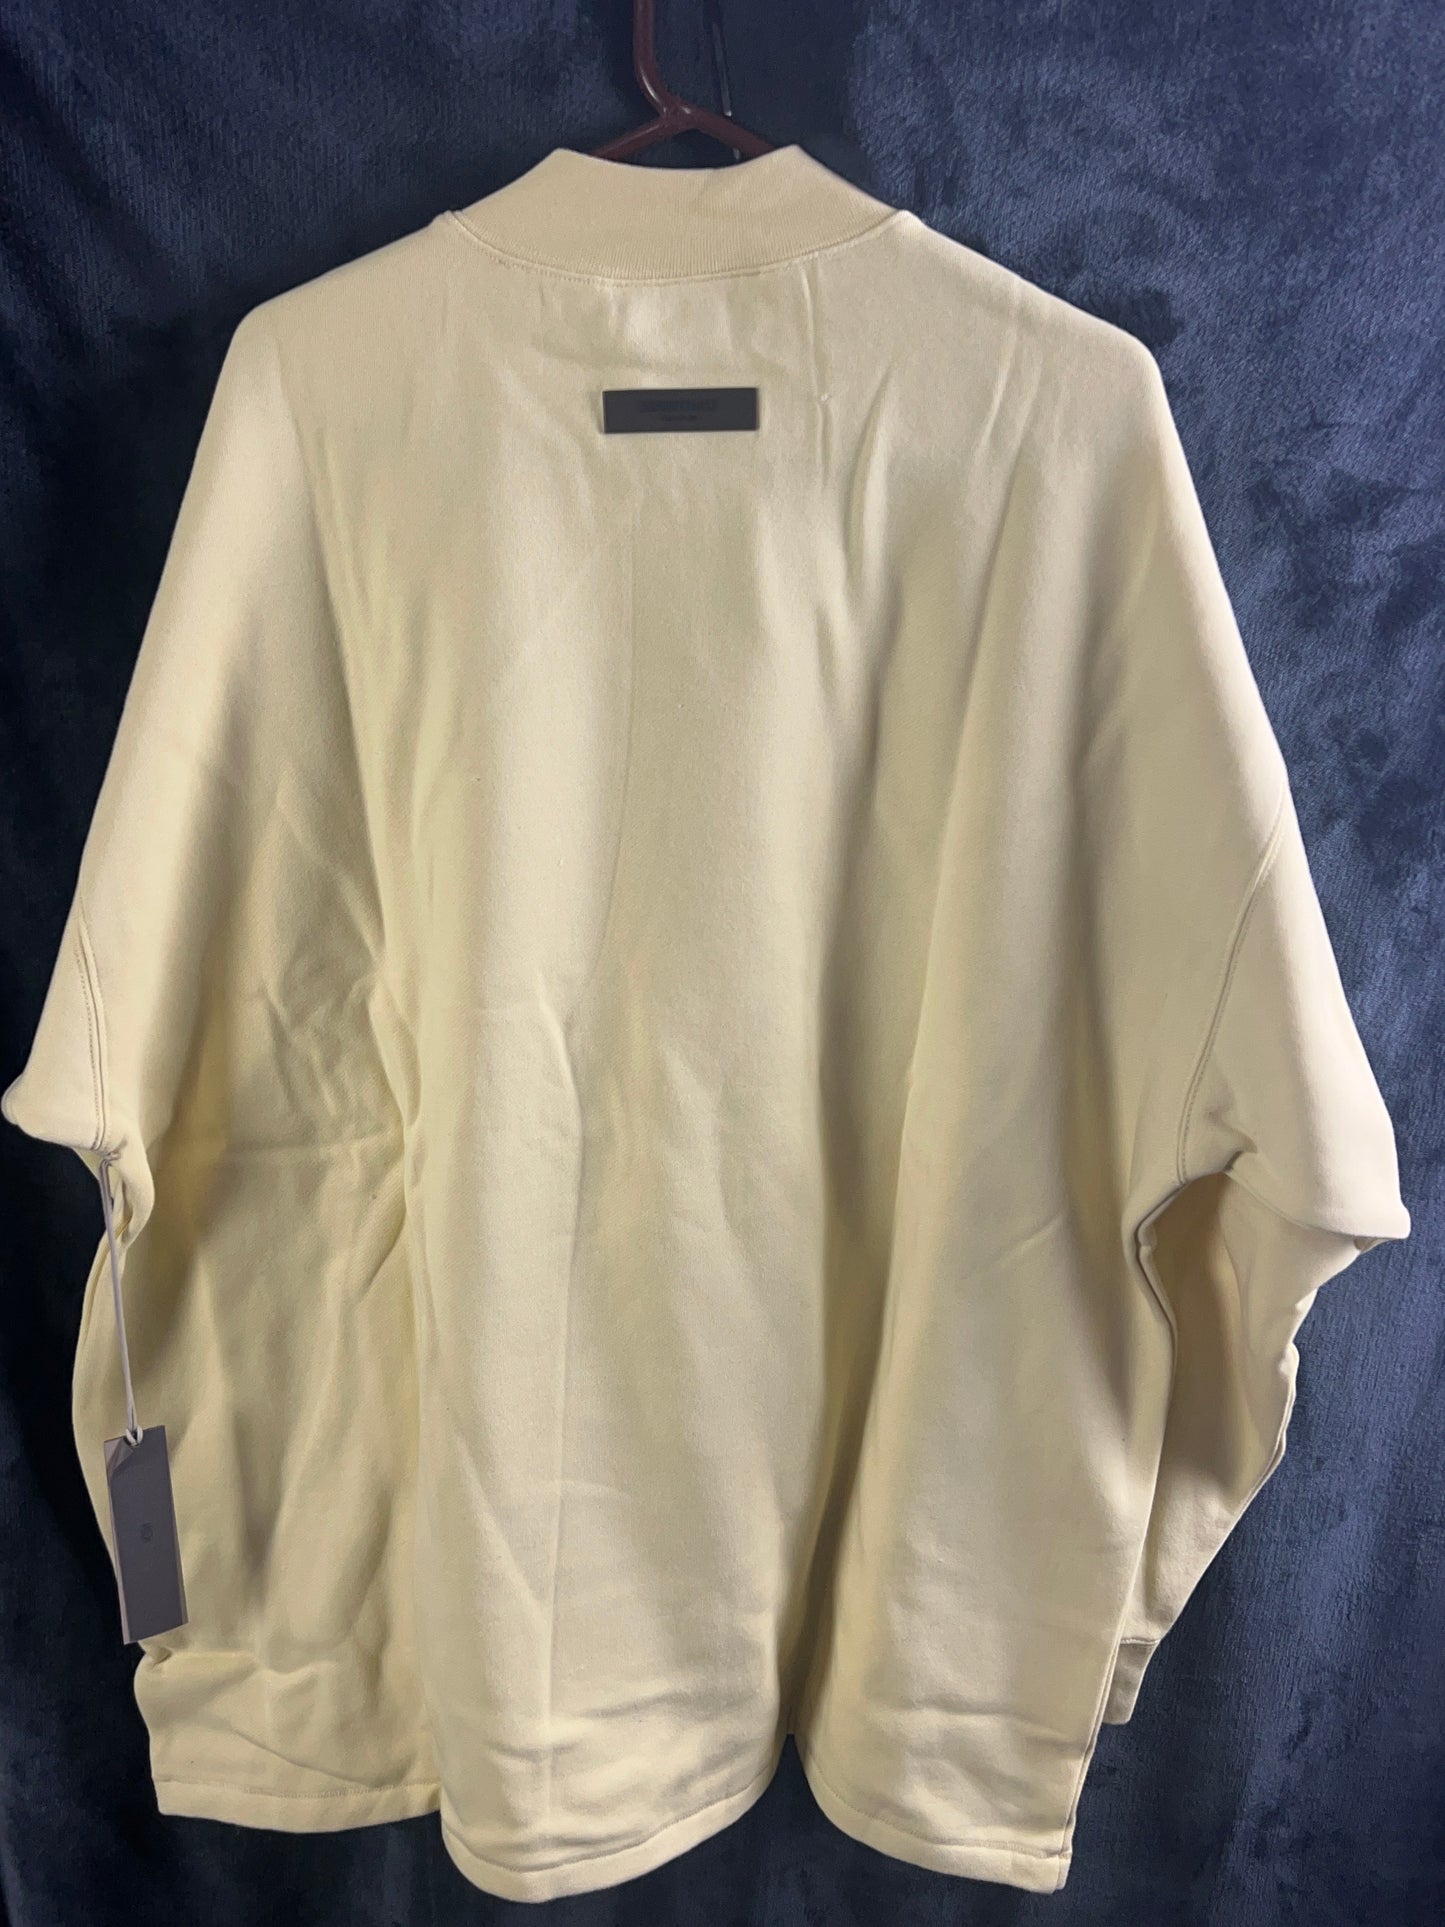 Essentials Fear of God Long Sleeve Crew Neck Sweater Size XL Canary Yellow NWT